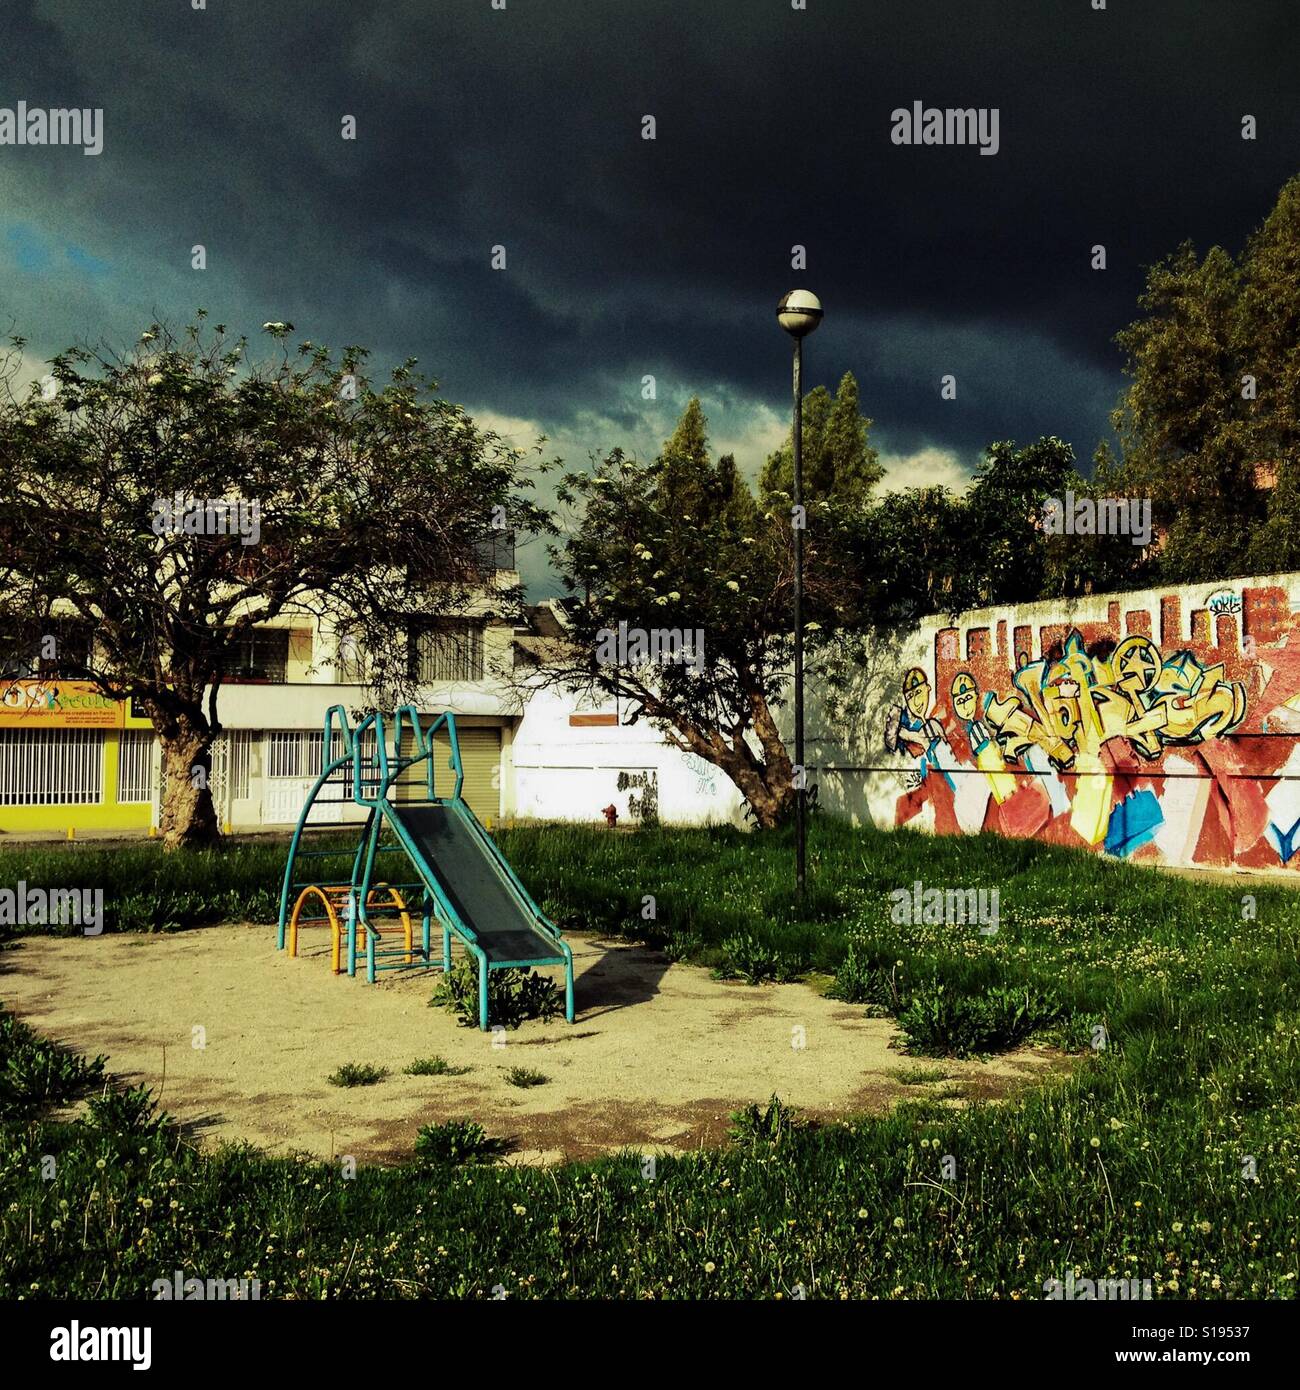 A children's slide is seen at the playground while a usual afternoon storm approaches in Quito, Ecuador, 16 November 2014. Stock Photo